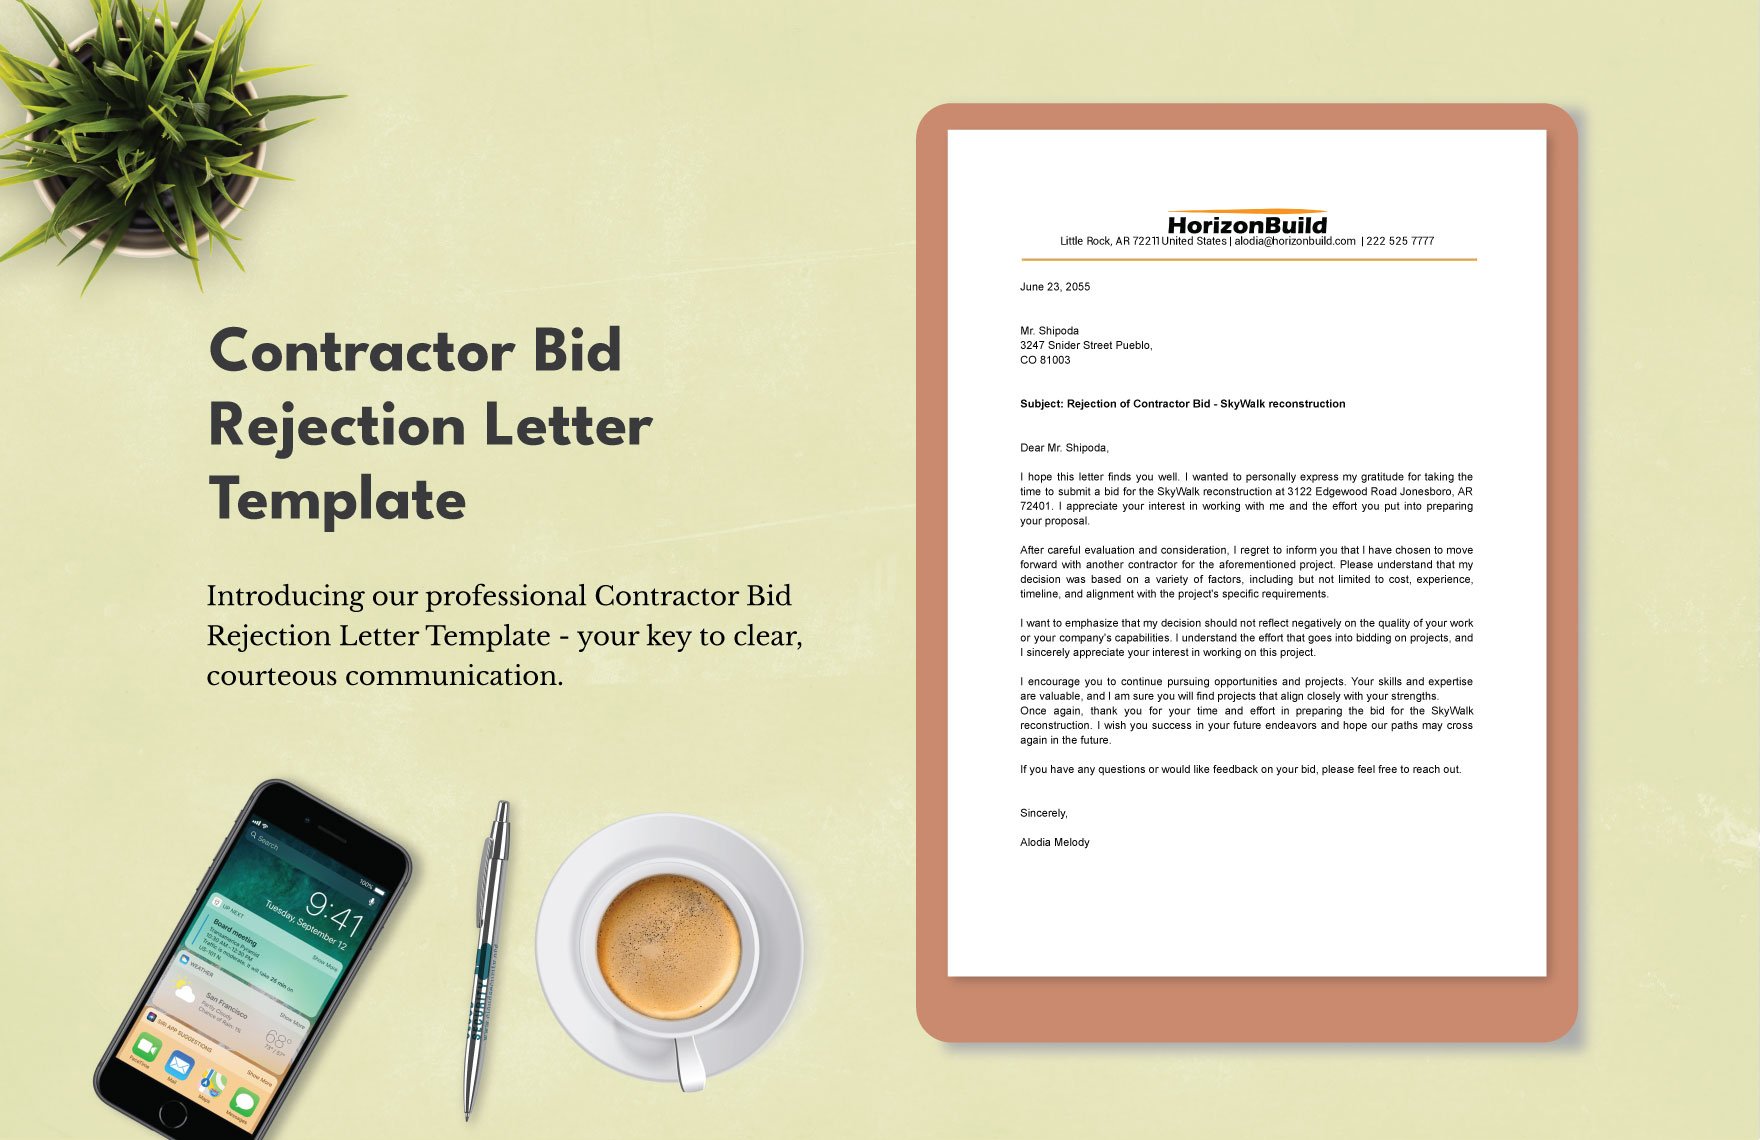 Contractor Bid Rejection Letter Template